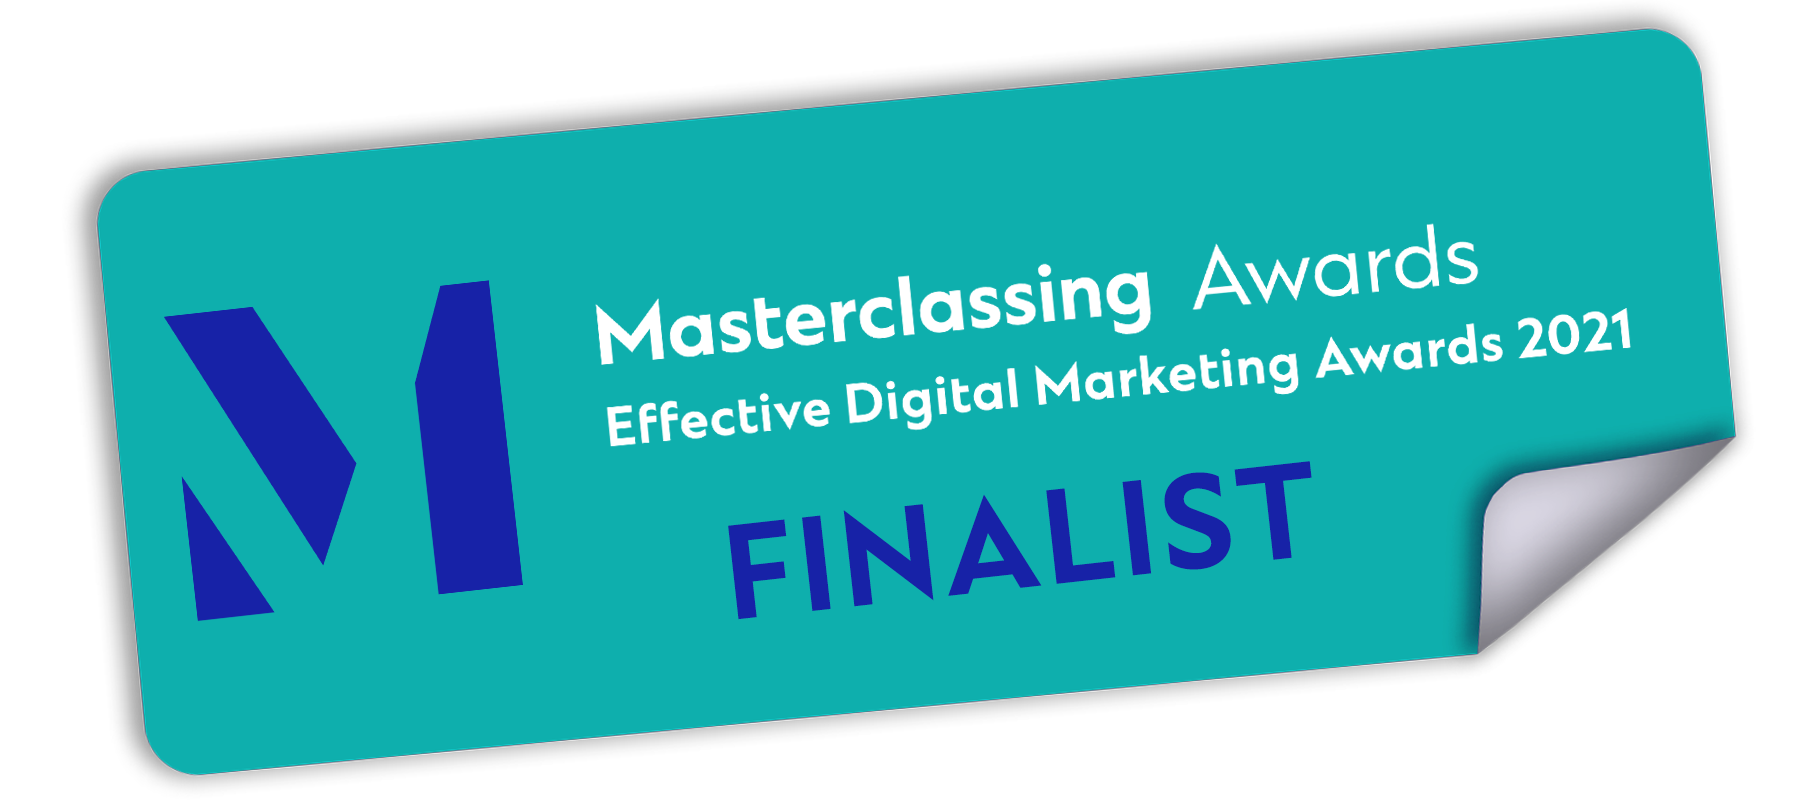 Most Effective Data & Analytics Campaign: Mapp nominated alongside The Entertainer as finalist in Masterclassing Awards